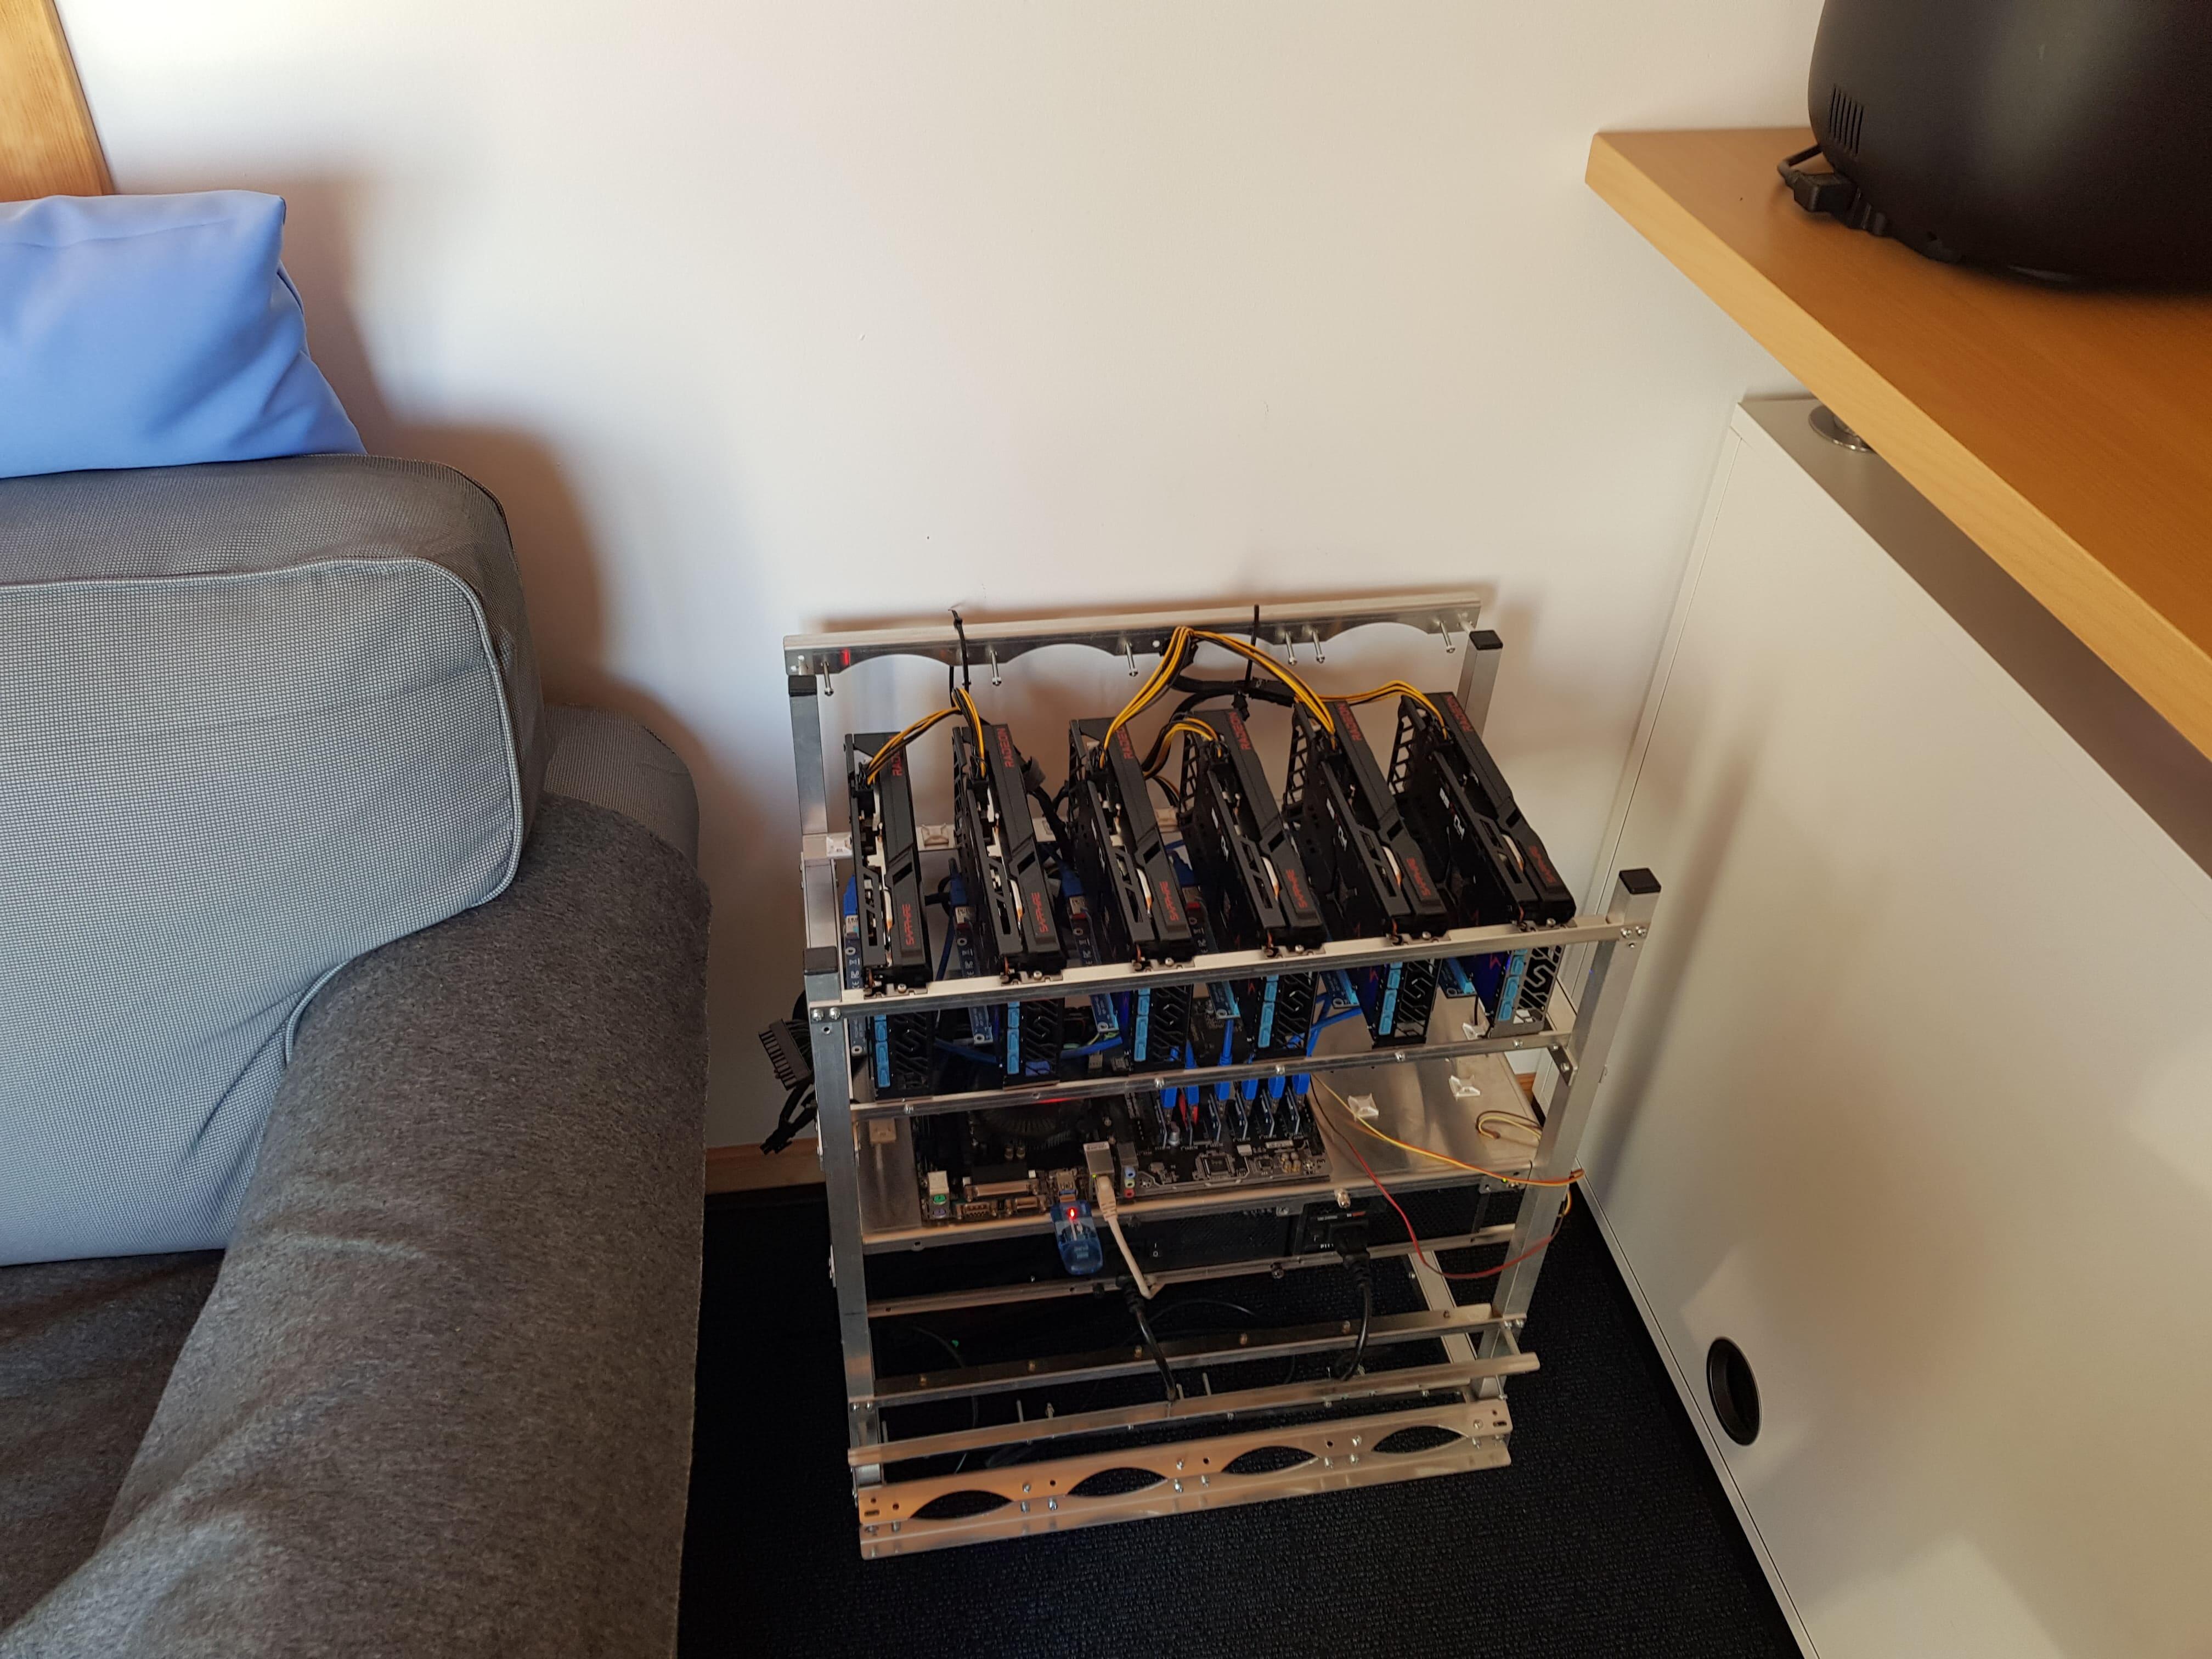 mining rig for etc